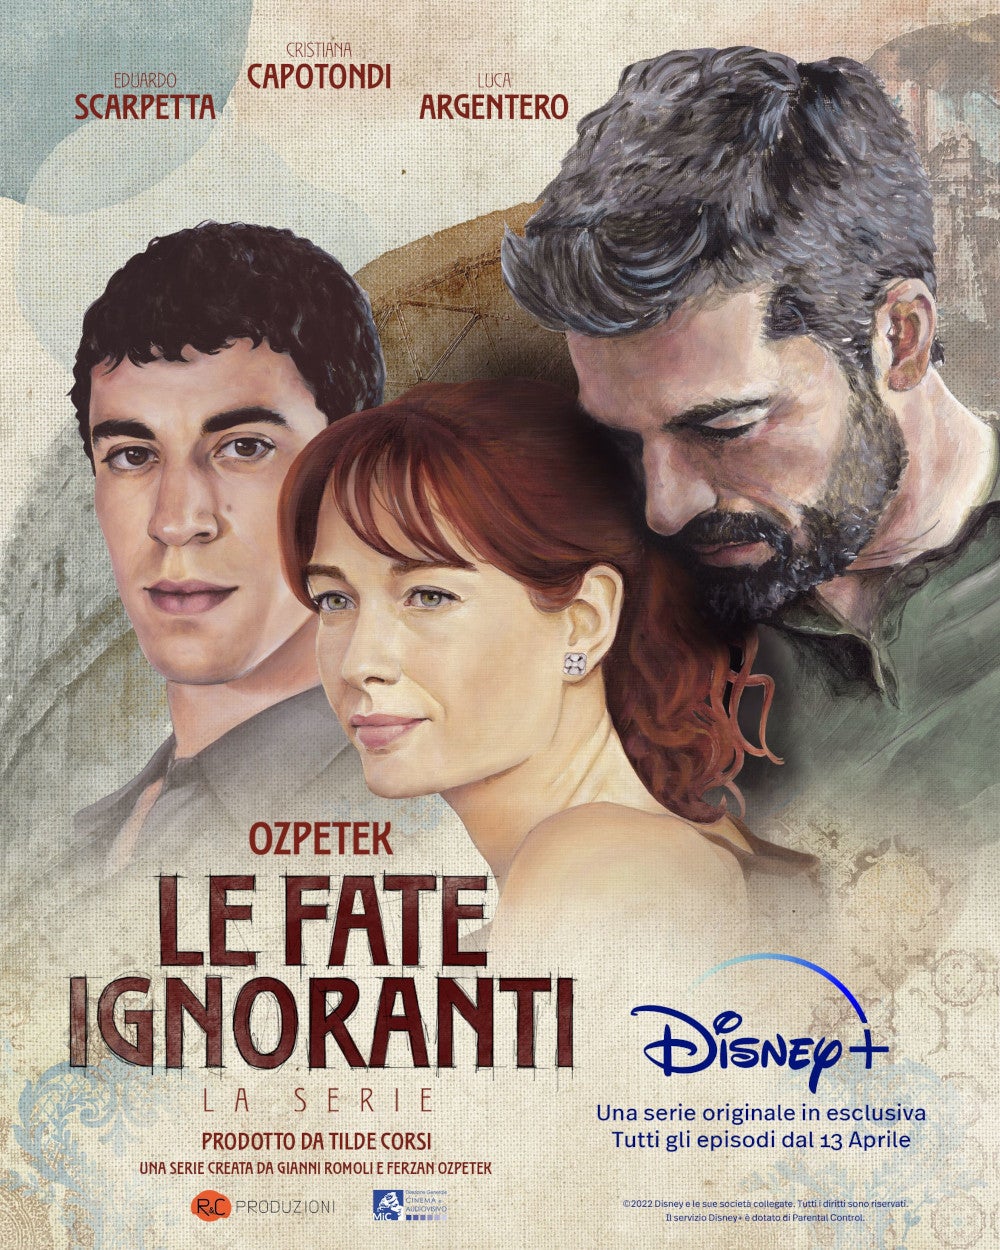 TV ratings for The Ignorant Angels (Le Fate Ignoranti) in New Zealand. Disney+ TV series